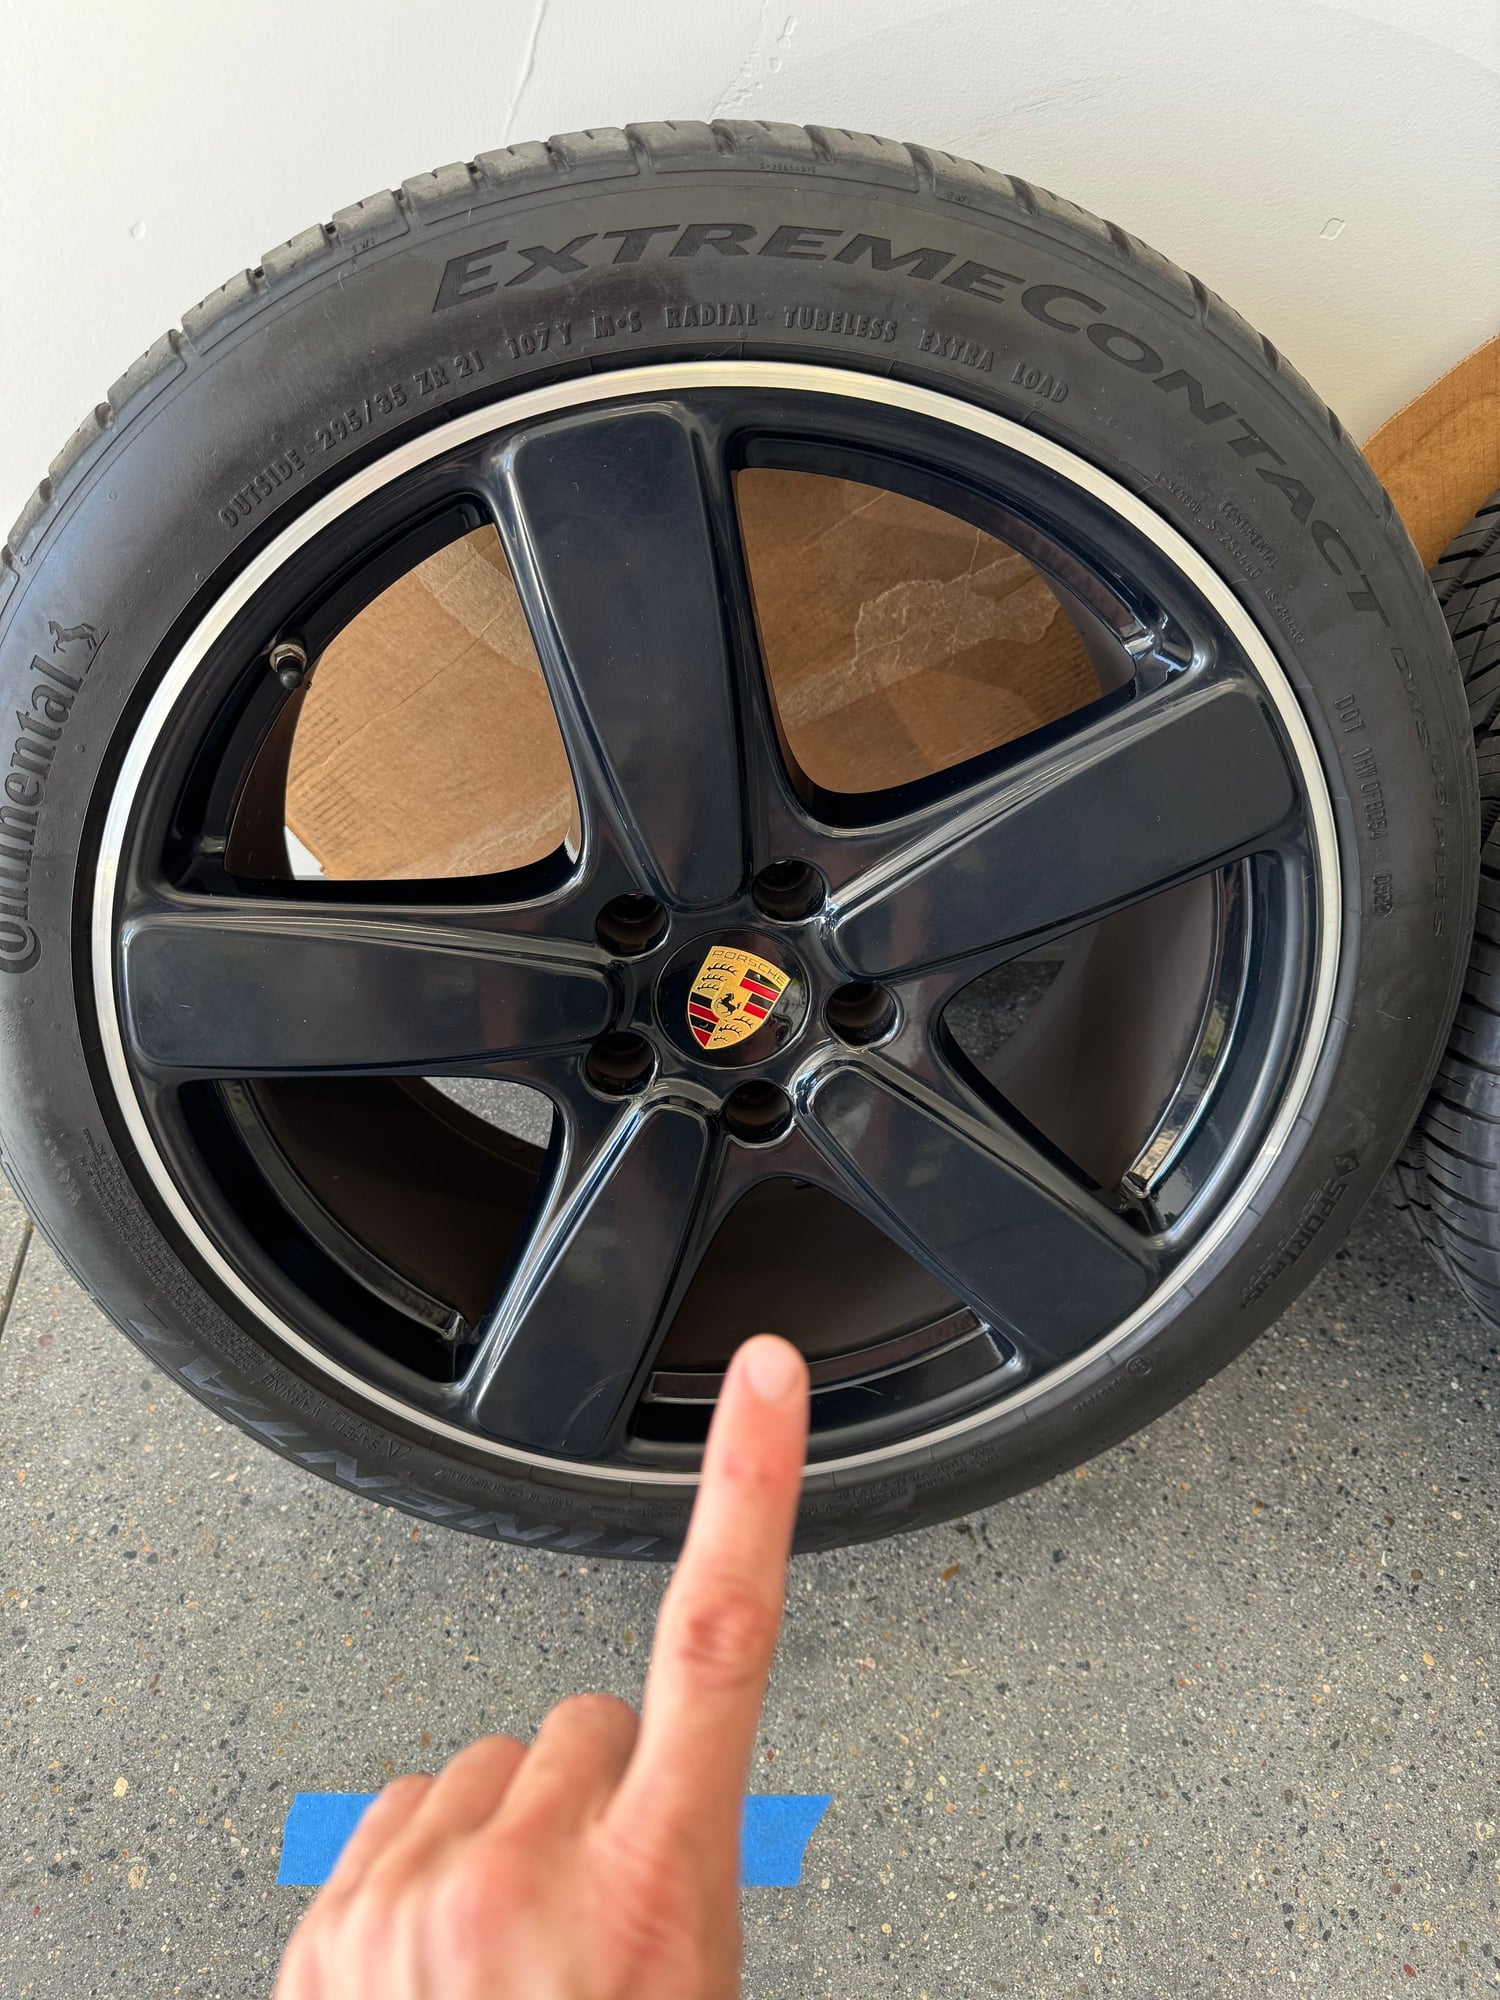 Wheels and Tires/Axles - 21” Porsche Sport Classic Wheels + Continental Extreme tires - Used - All Years  All Models - All Years  All Models - San Diego, CA 92120, United States